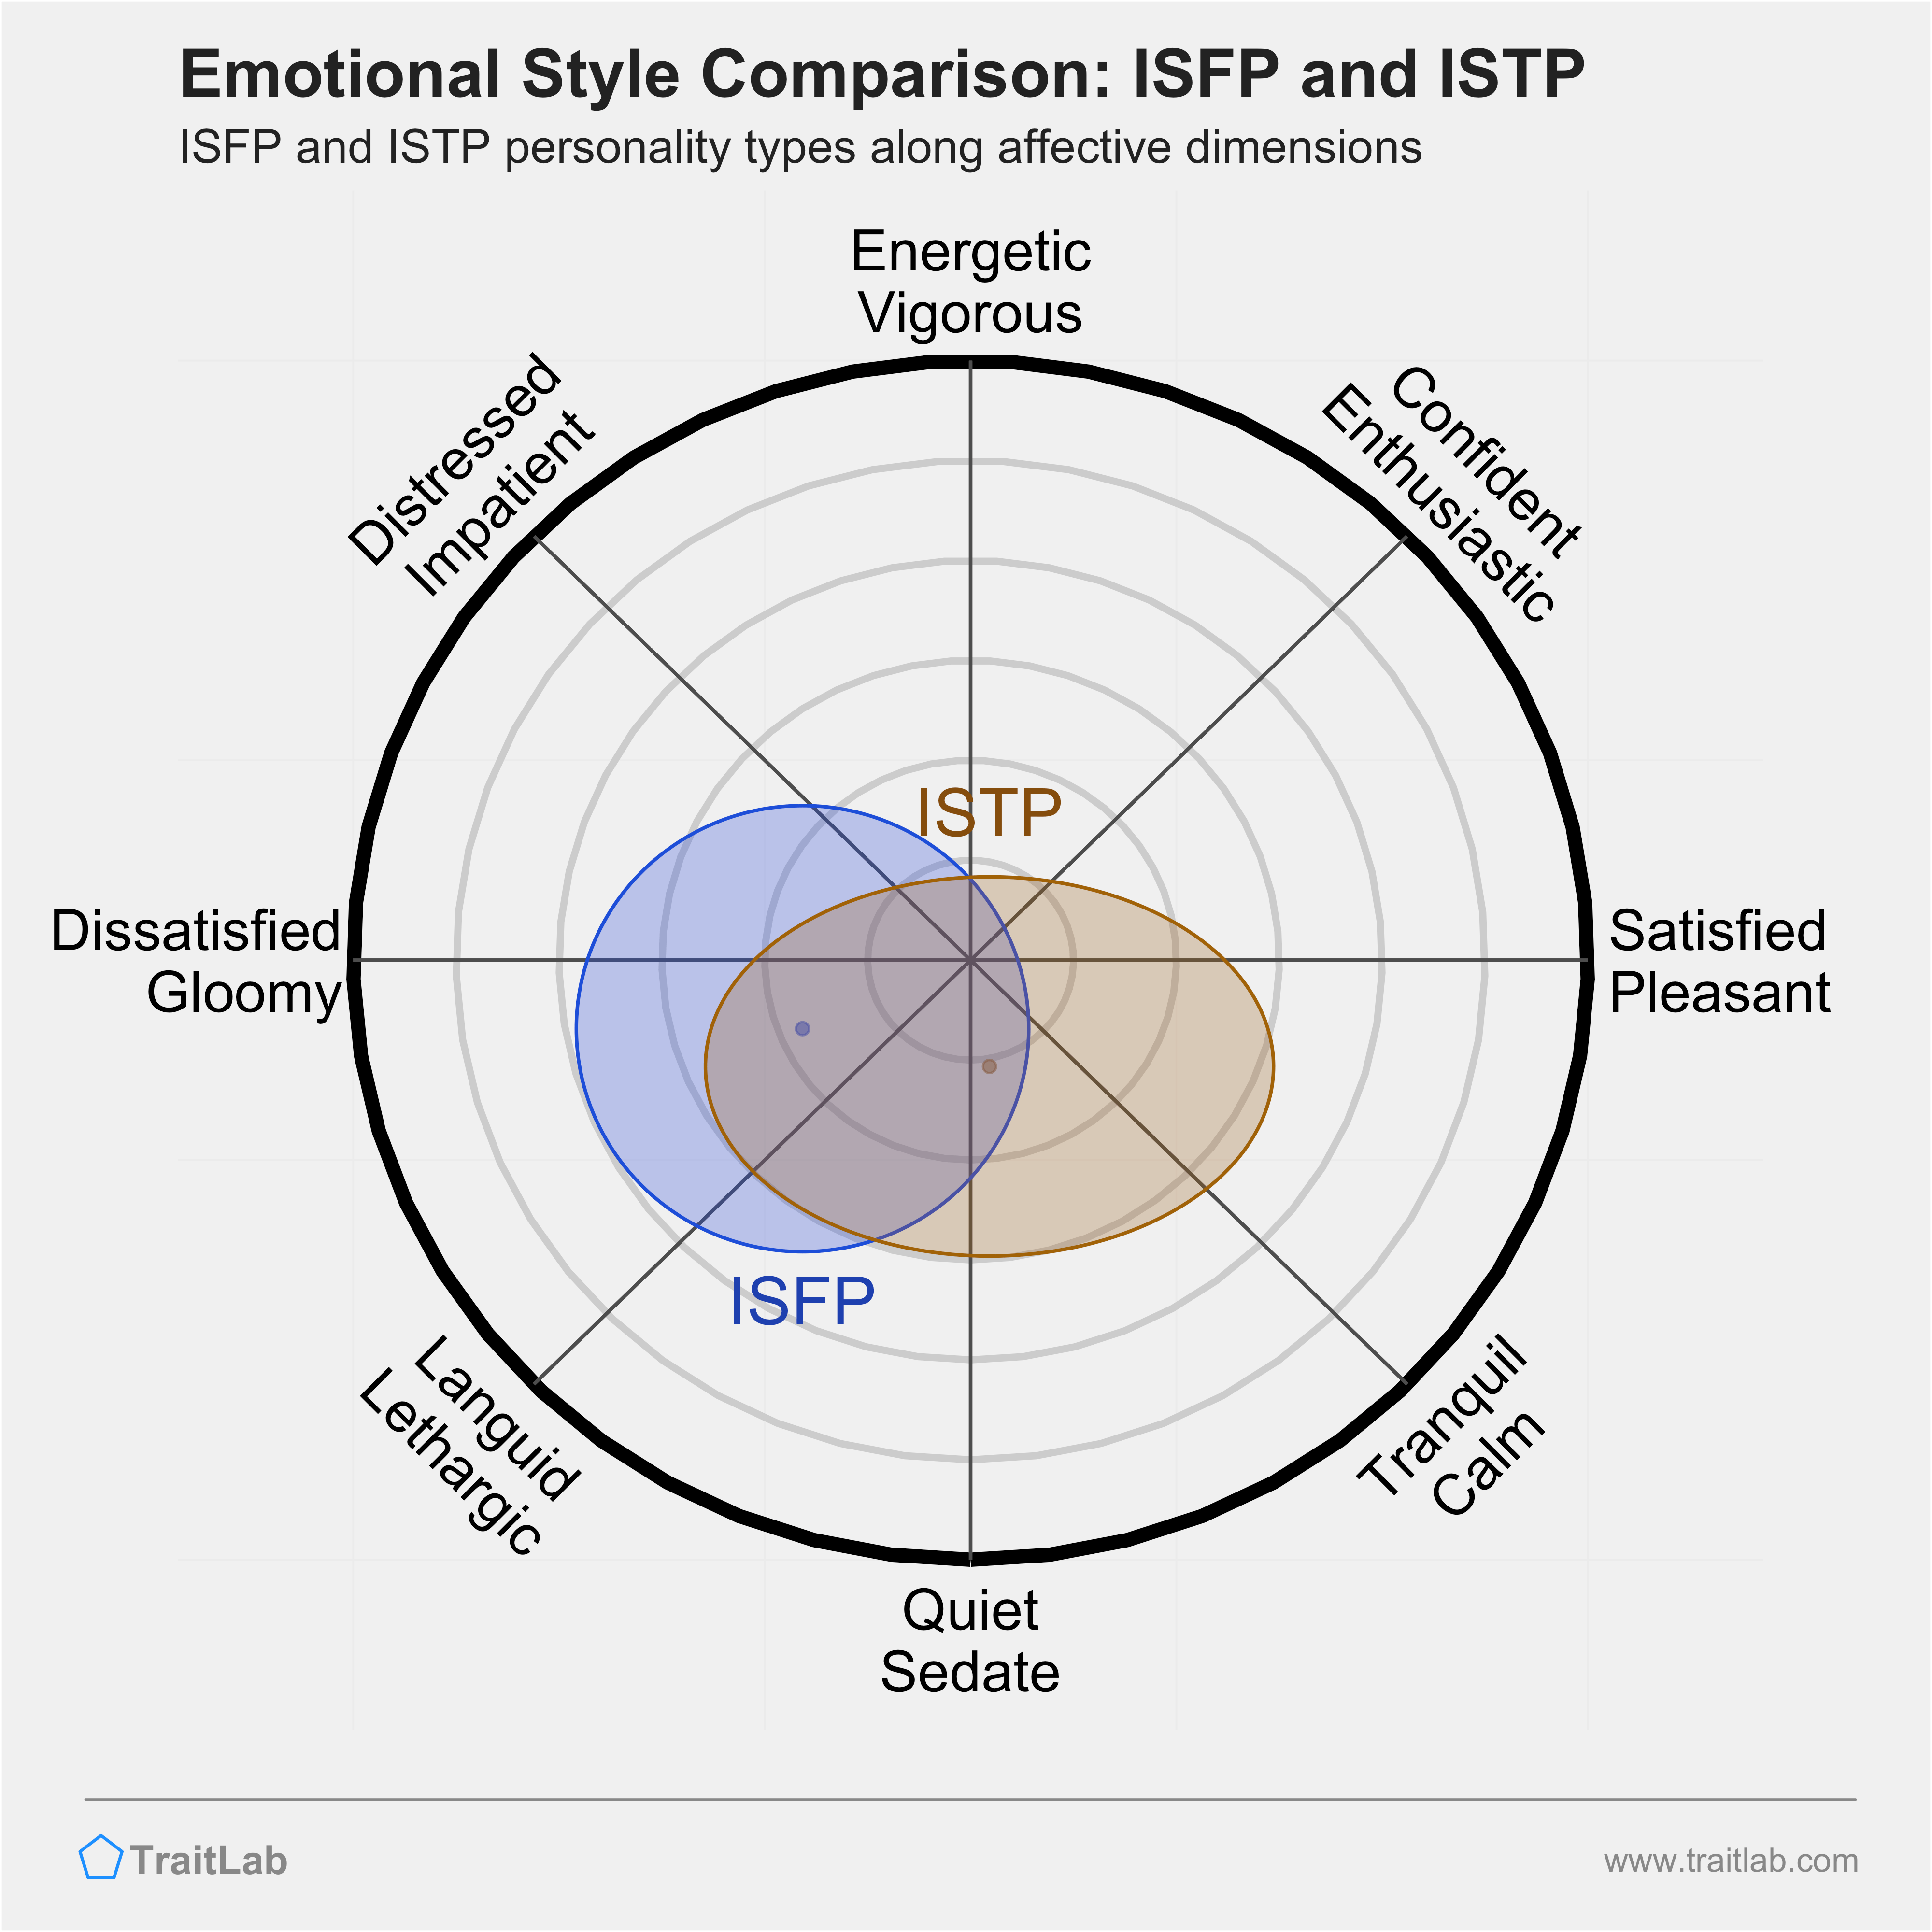 ISFP and ISTP comparison across emotional (affective) dimensions